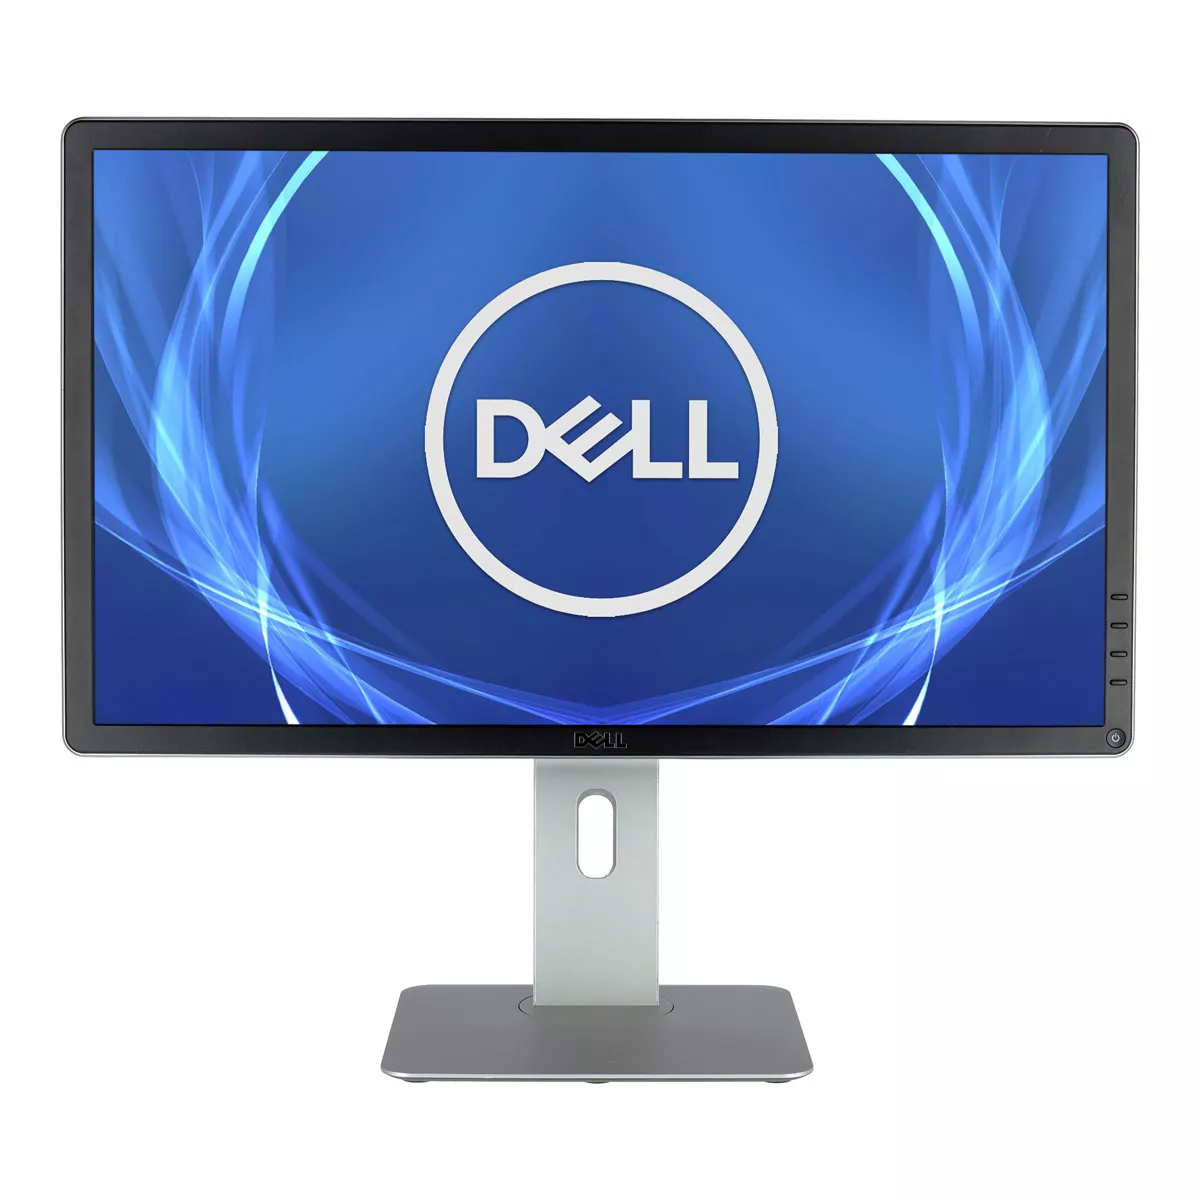 Dell P2414hb 24 Zoll 1920x1080 LED schwarz silber A+